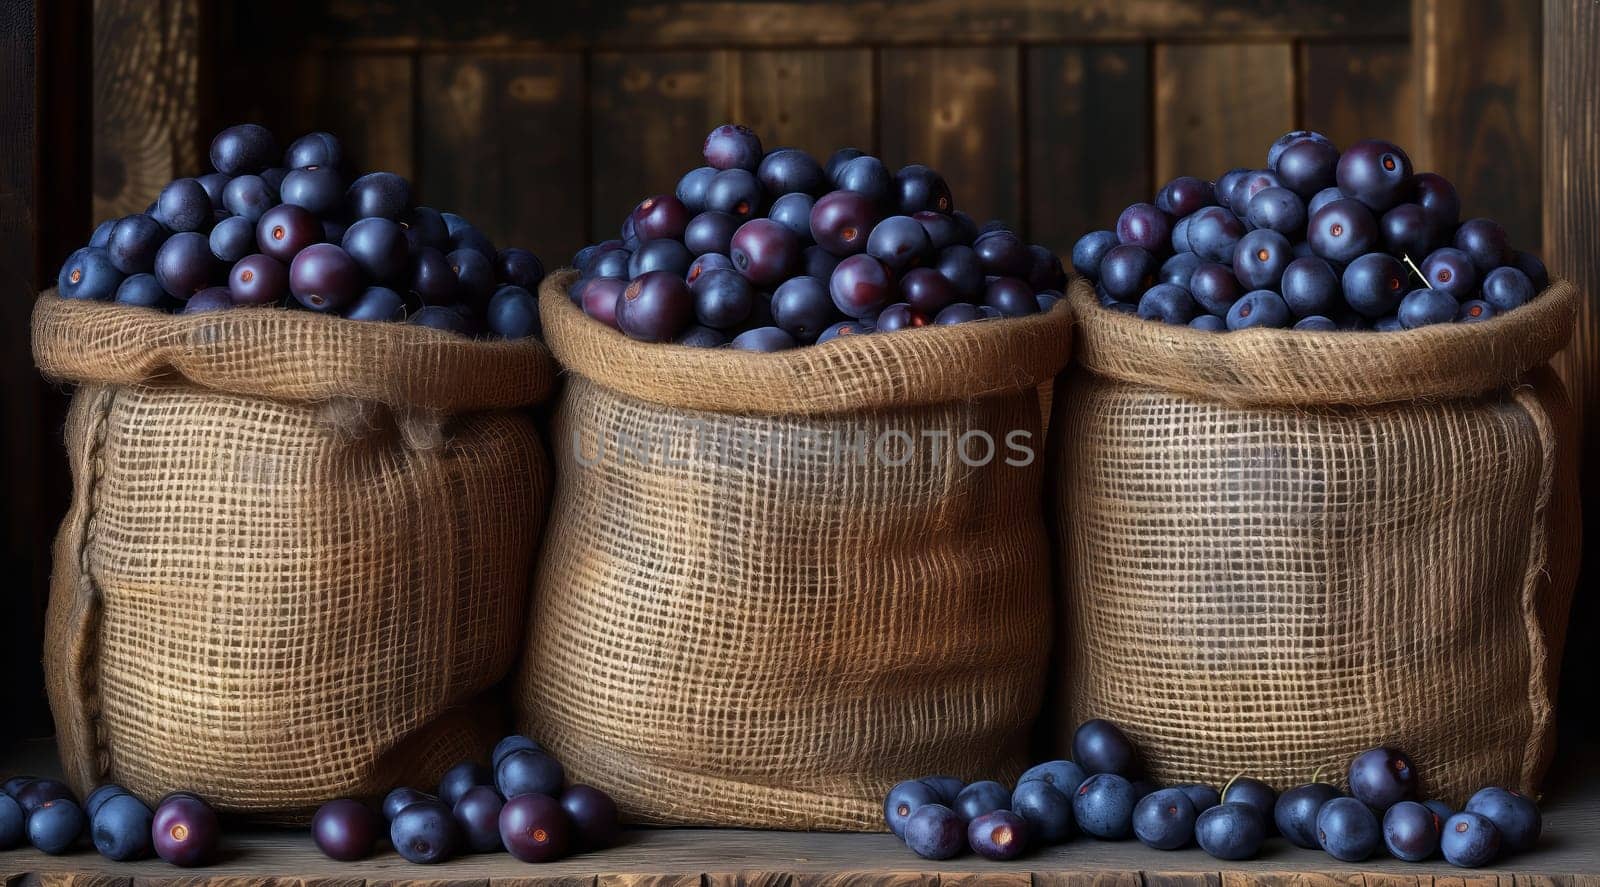 Three Natural foods storage baskets filled with blueberries are displayed on a wooden shelf, making a colorful and healthy addition to any kitchen